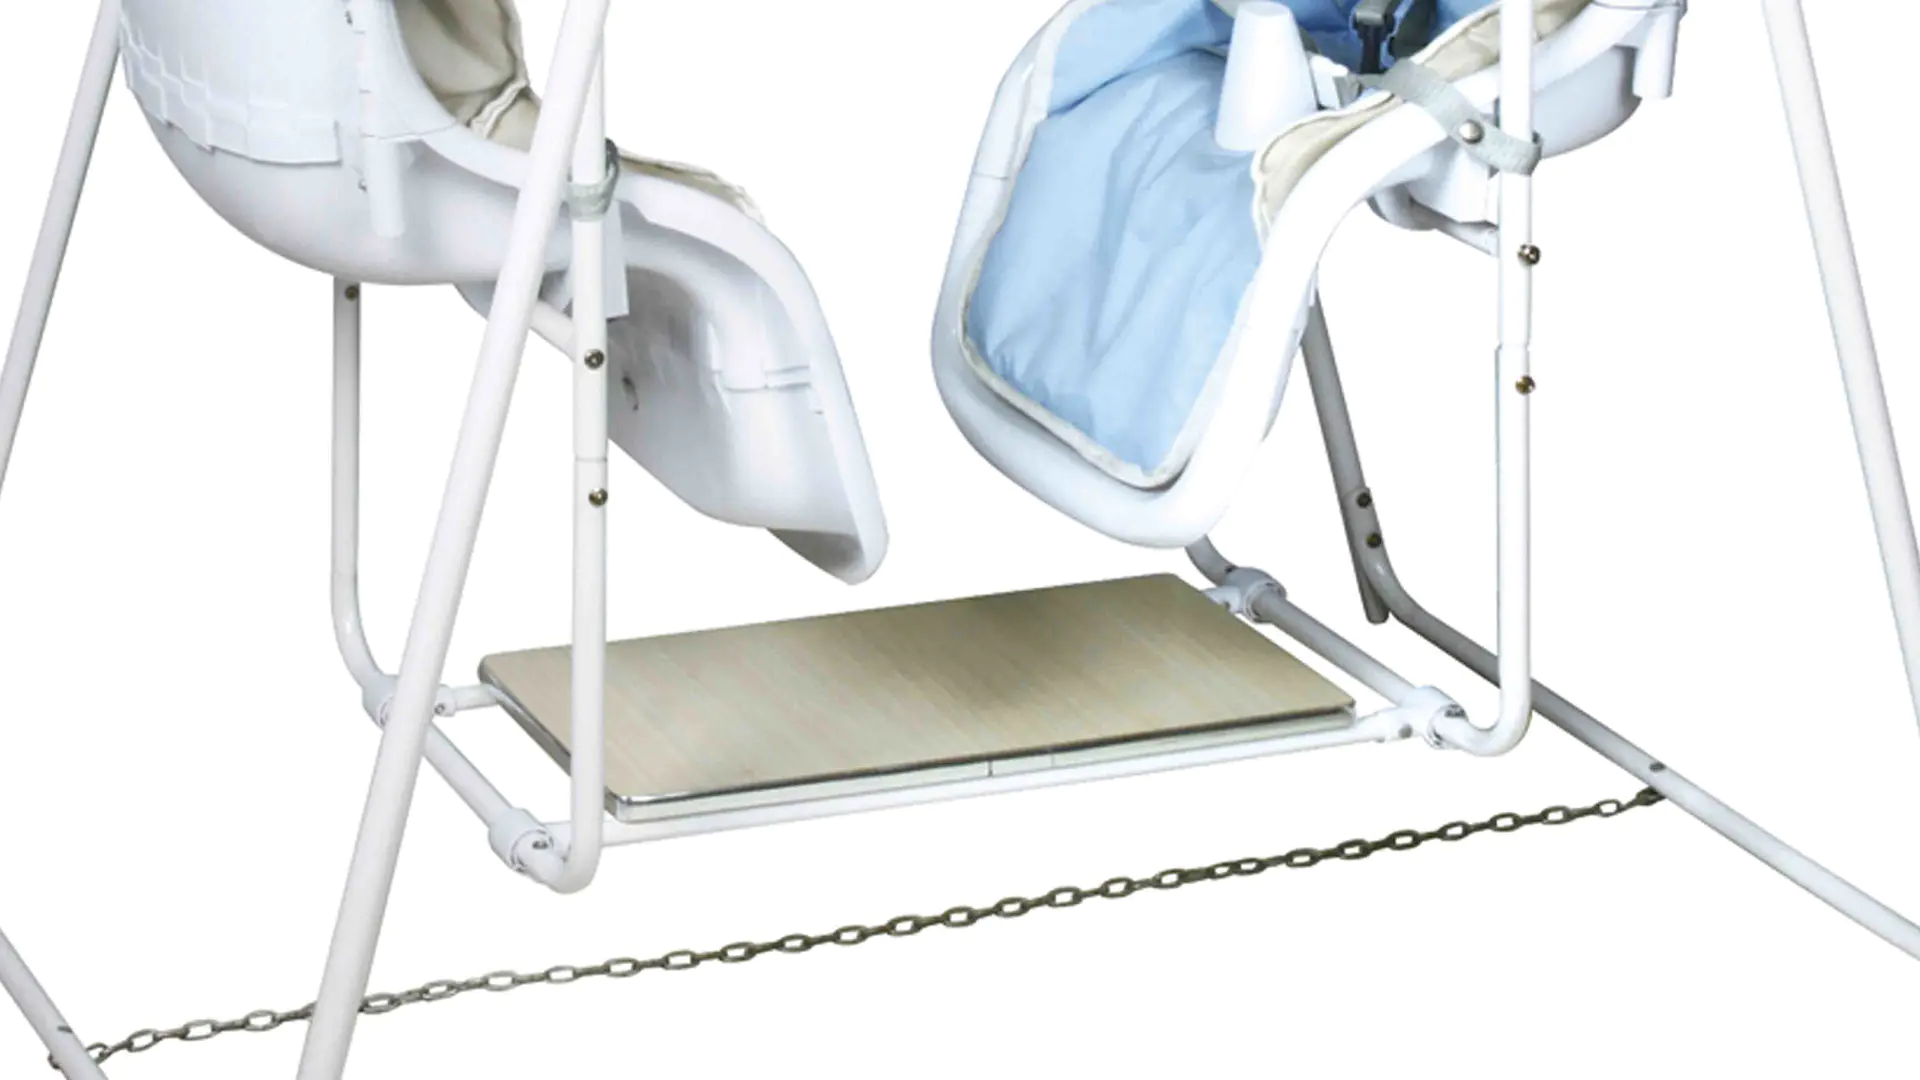 standard buy baby swing with good price for babys room